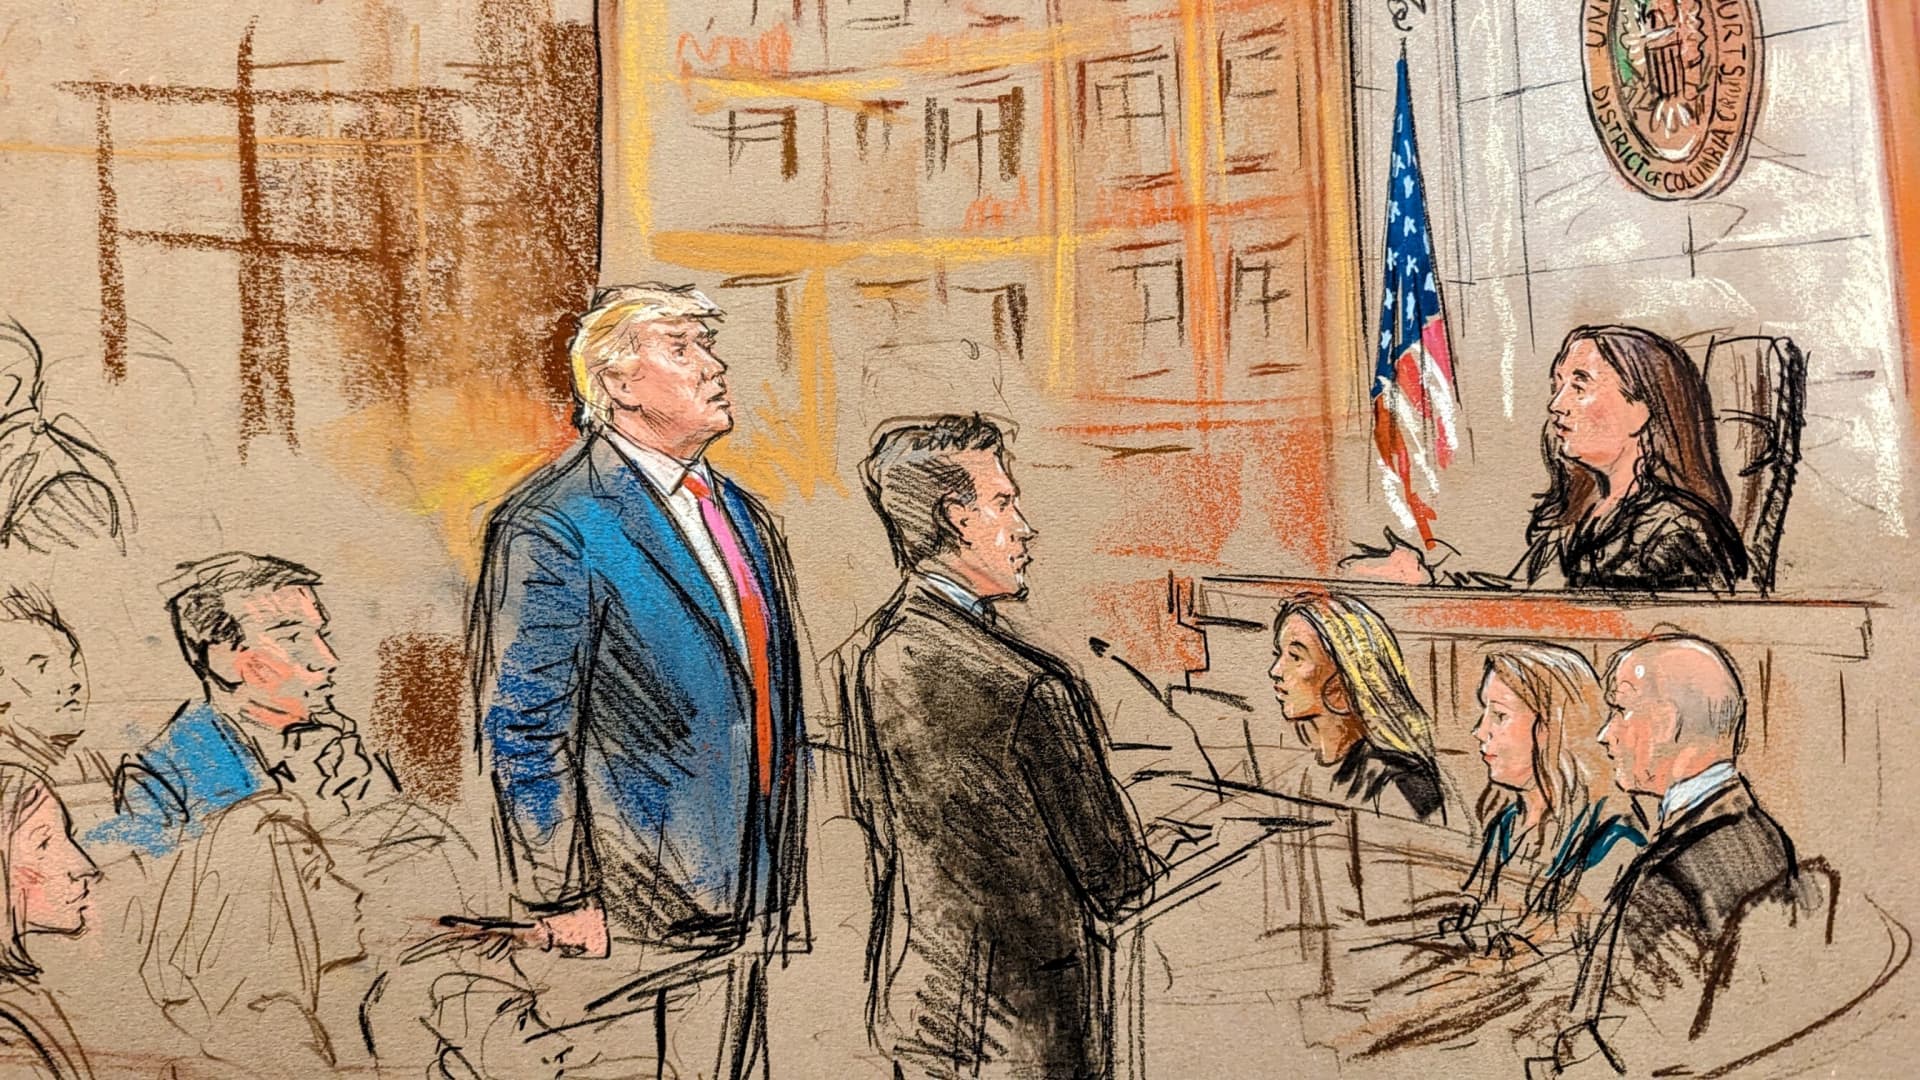 Former U.S. President Donald Trump stands next to his attorney Todd Blanche as he faces charges before Magistrate Judge Moxila A. Upadhyaya that he orchestrated a plot to try to overturn his 2020 election loss, at federal court in Washington, U.S. August 3, 2023 in a courtroom sketch.